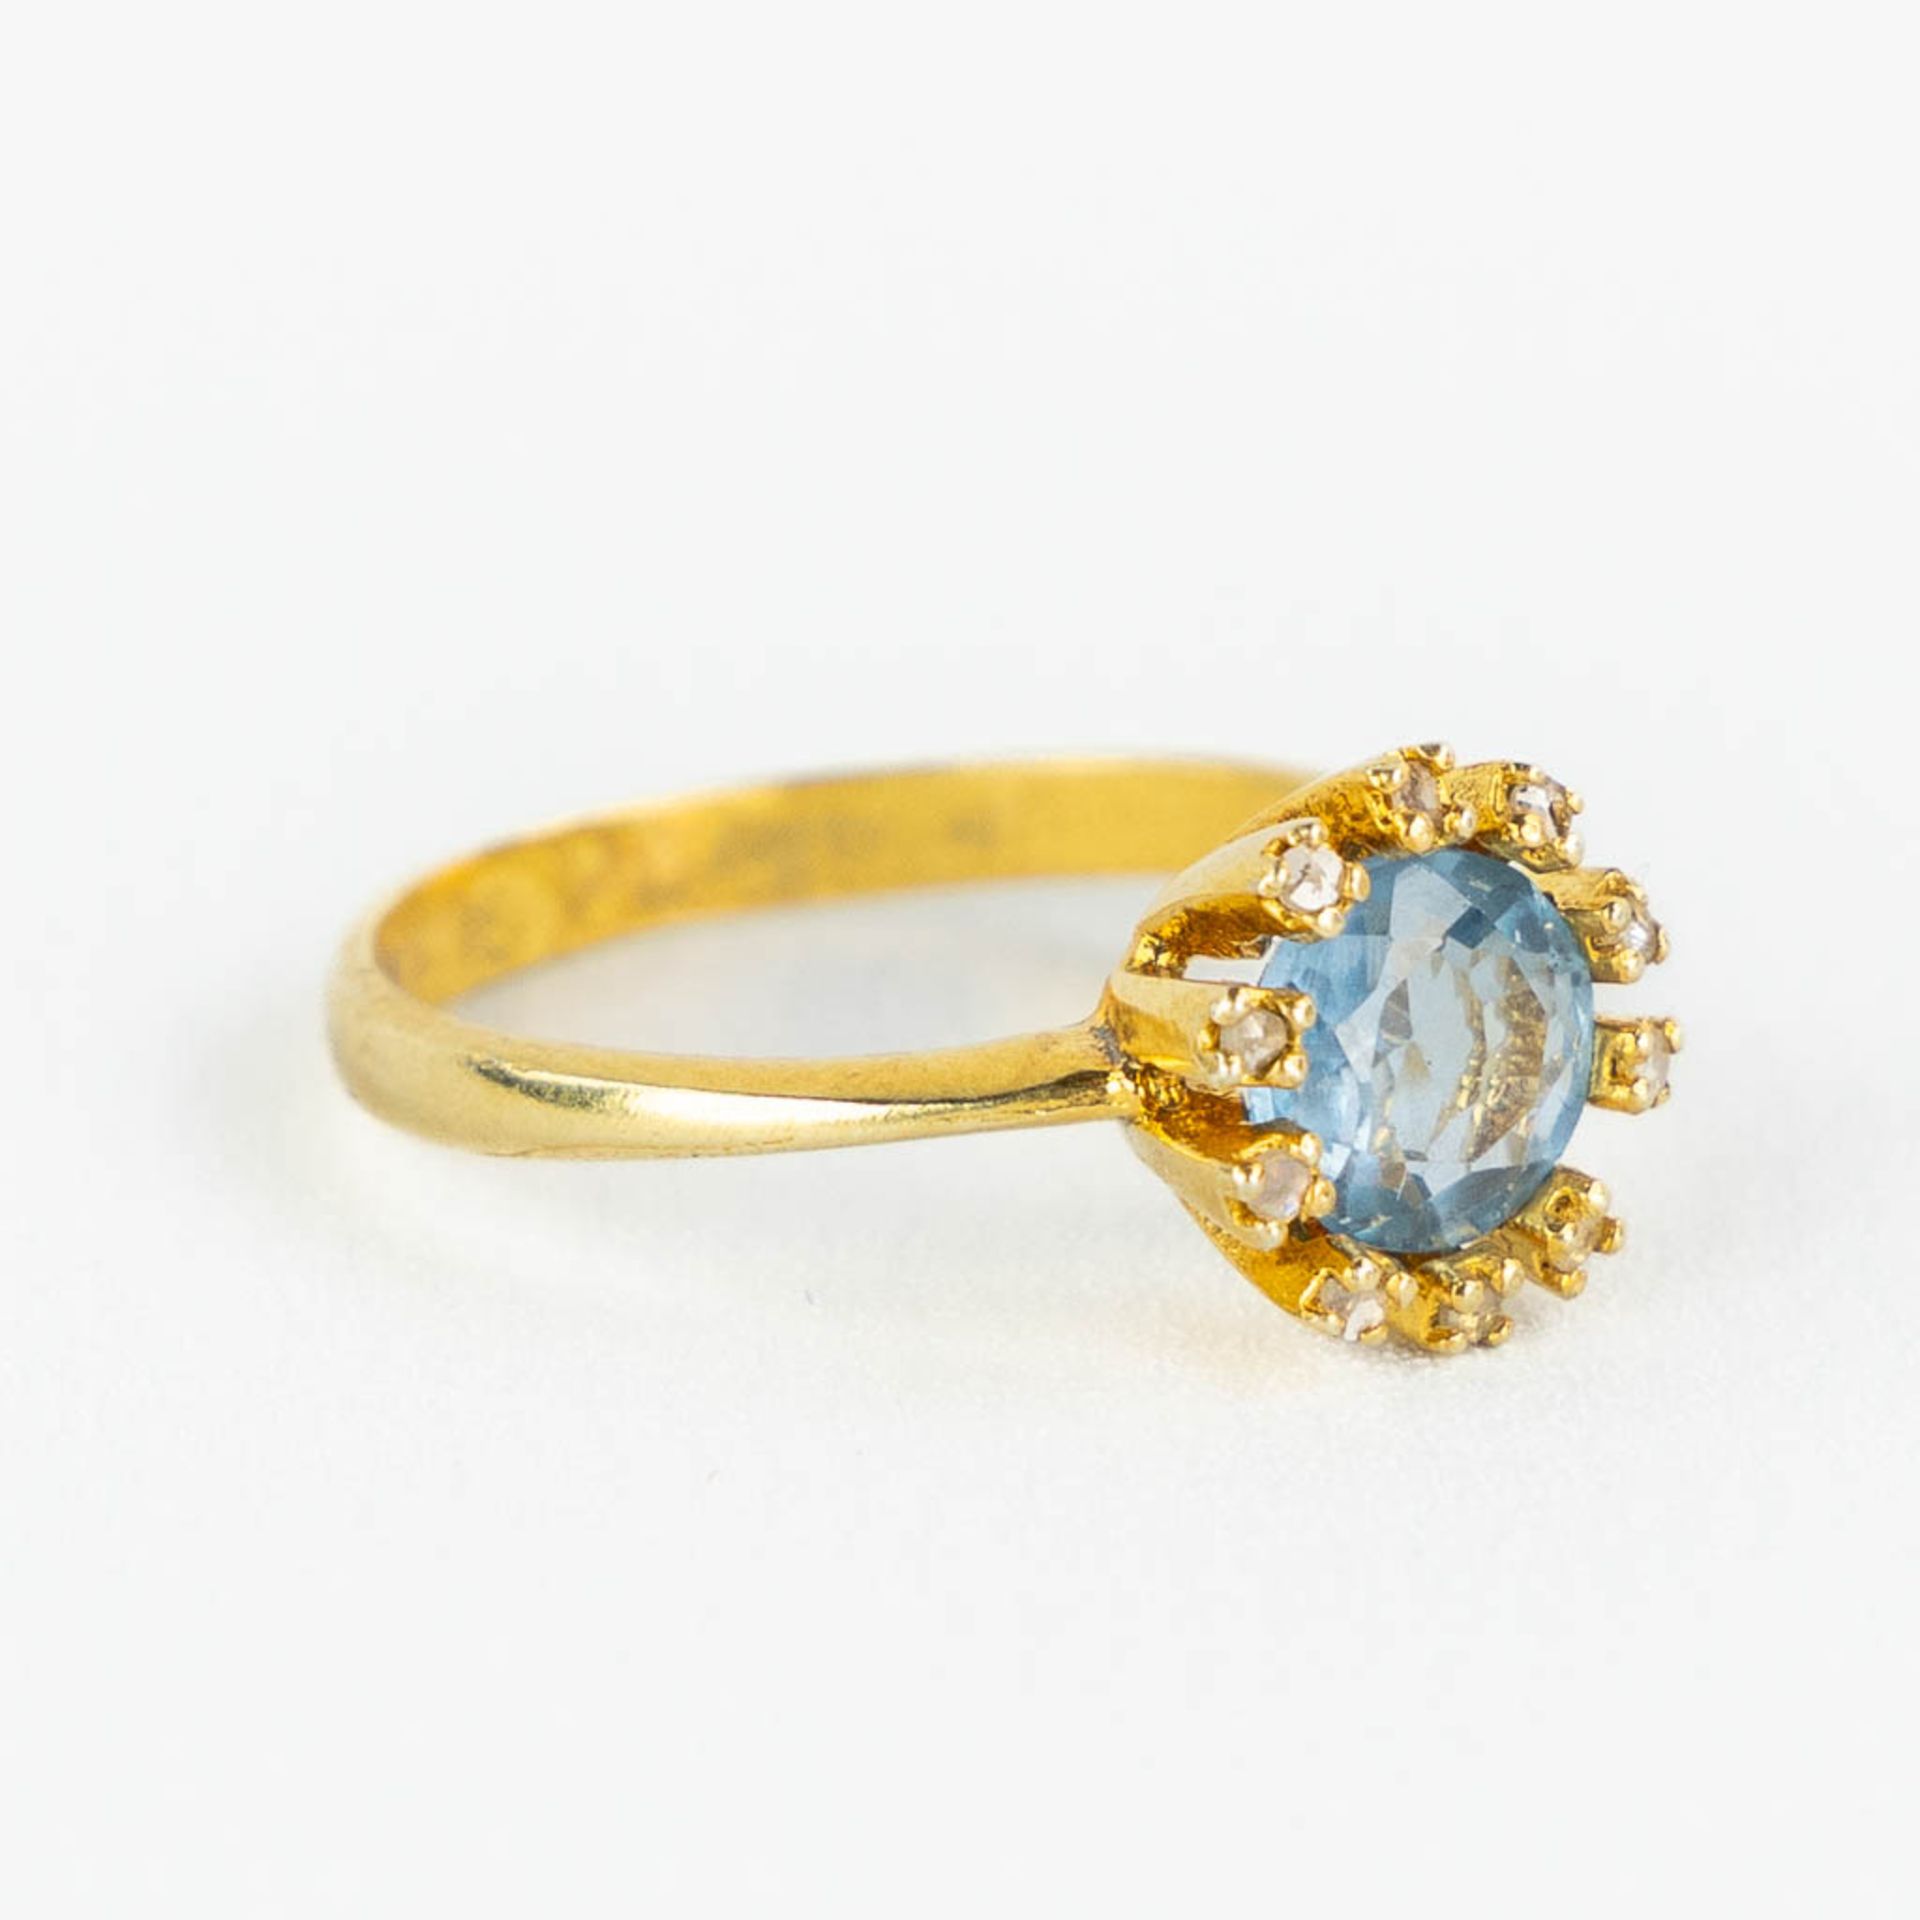 A ring, gilt silver with a cut topaaz, old cut diamonds. 2,48g. Ring size 59. - Image 4 of 9